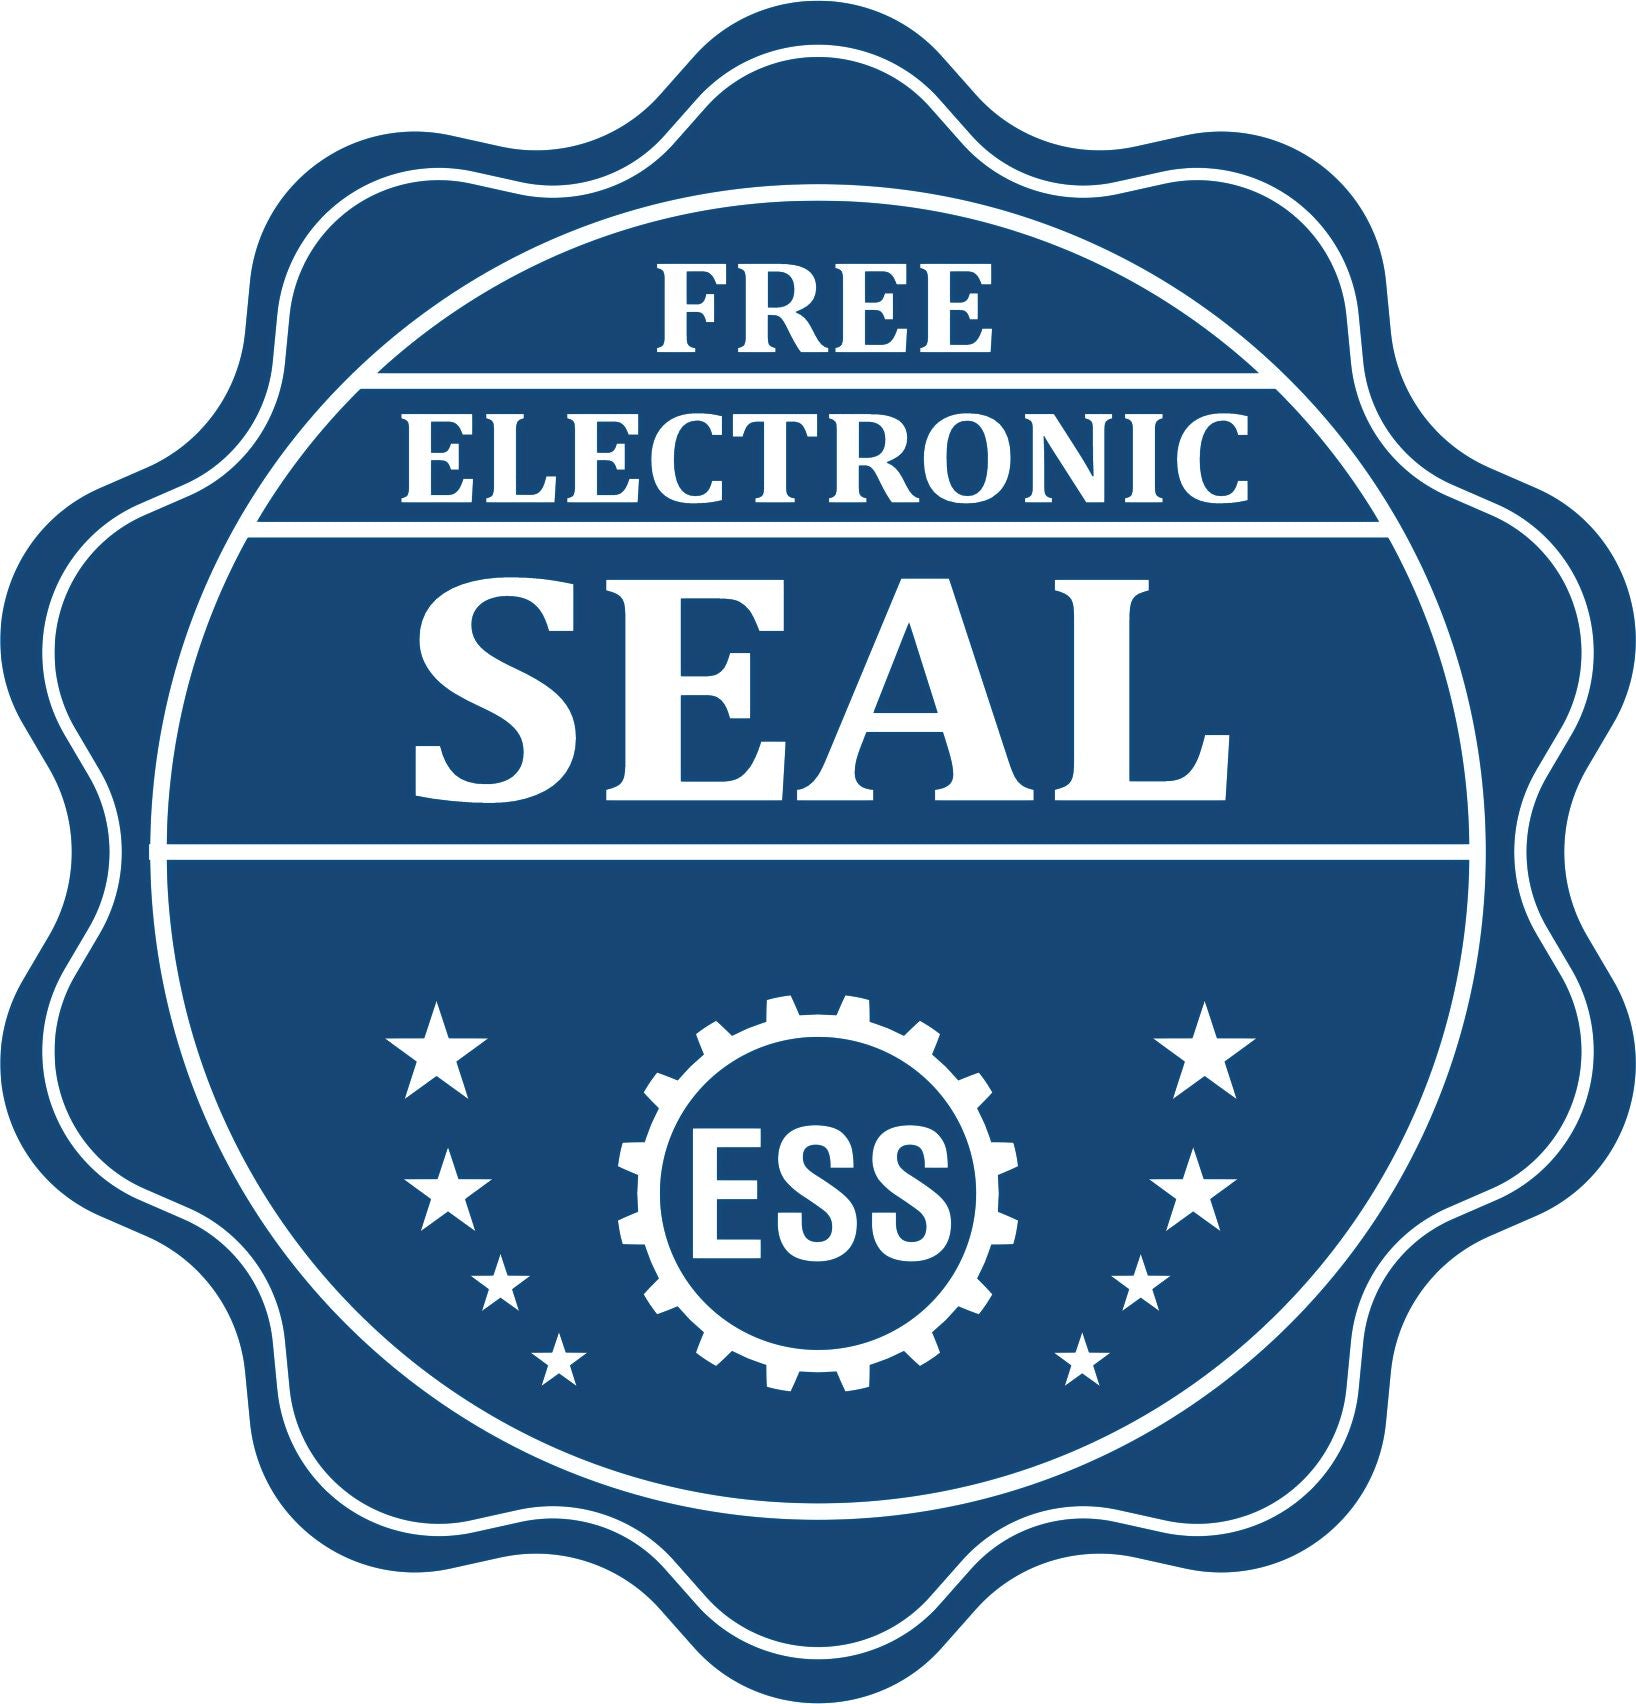 A badge showing a free electronic seal for the State of Tennessee Long Reach Architectural Embossing Seal with stars and the ESS gear on the emblem.